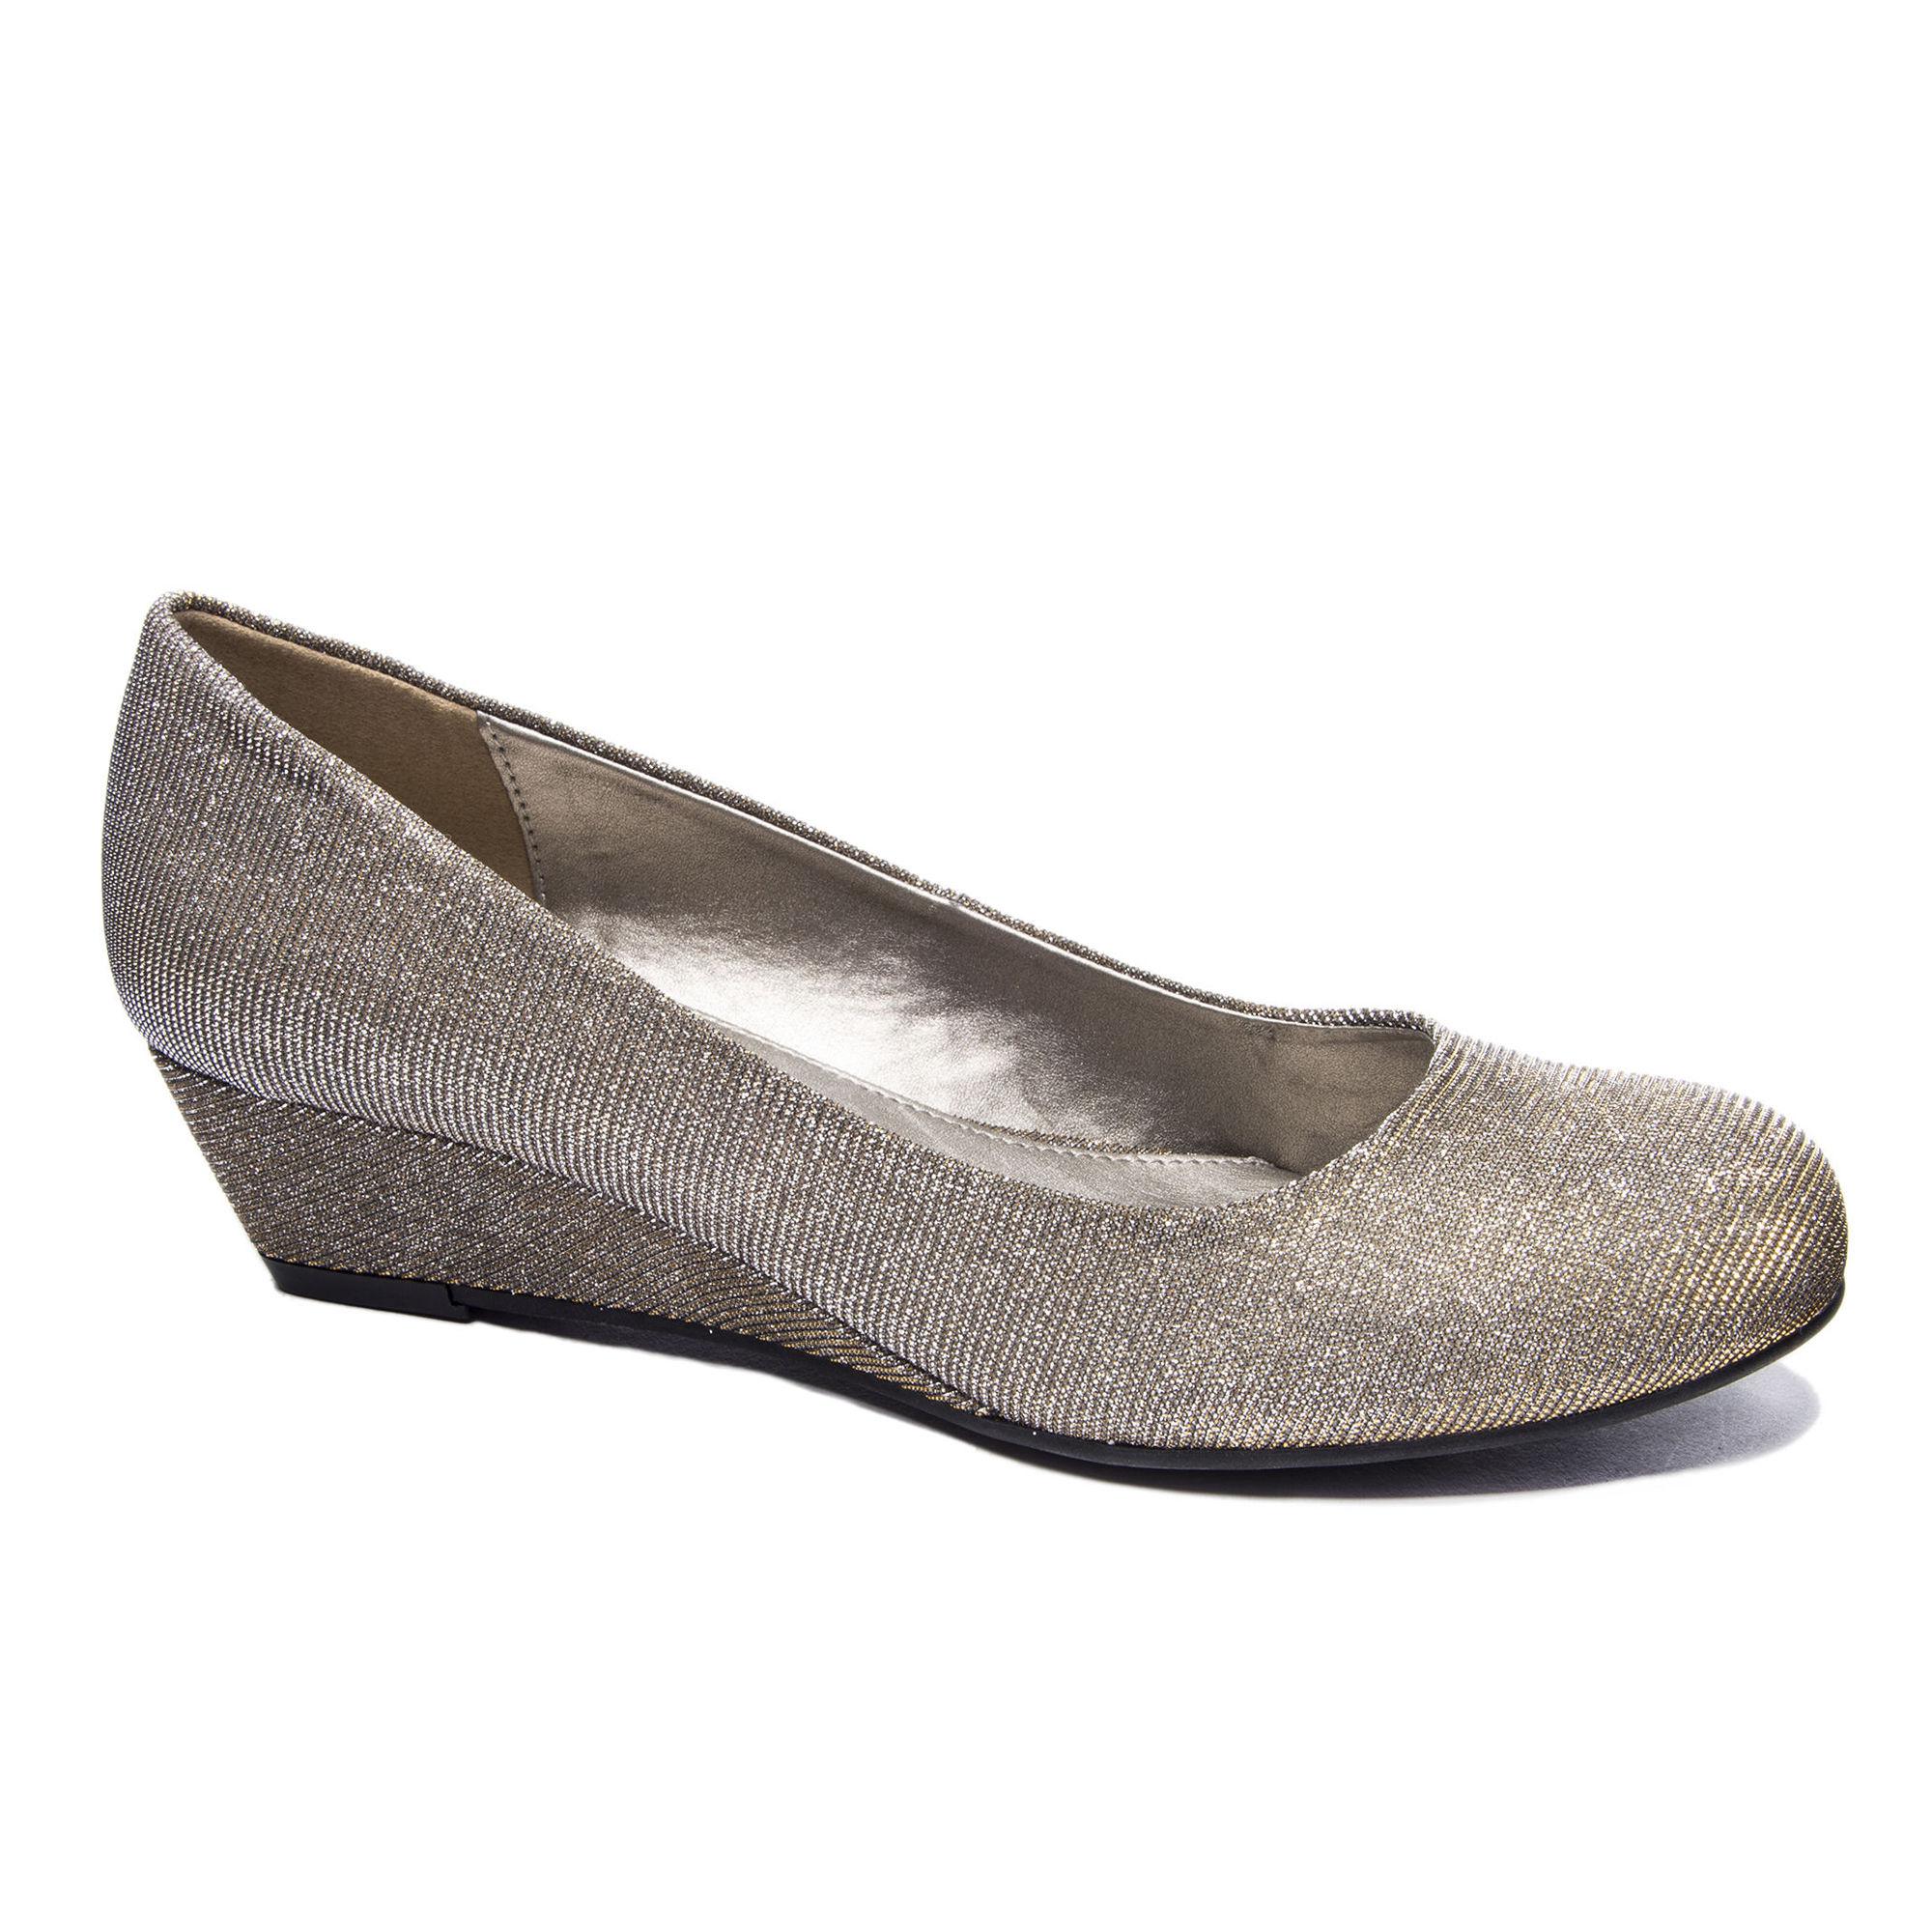 CL by Chinese Laundry Womens Marcie Metal Fros Wedge Pump, Champagne, 10 M US | Wedge pumps 